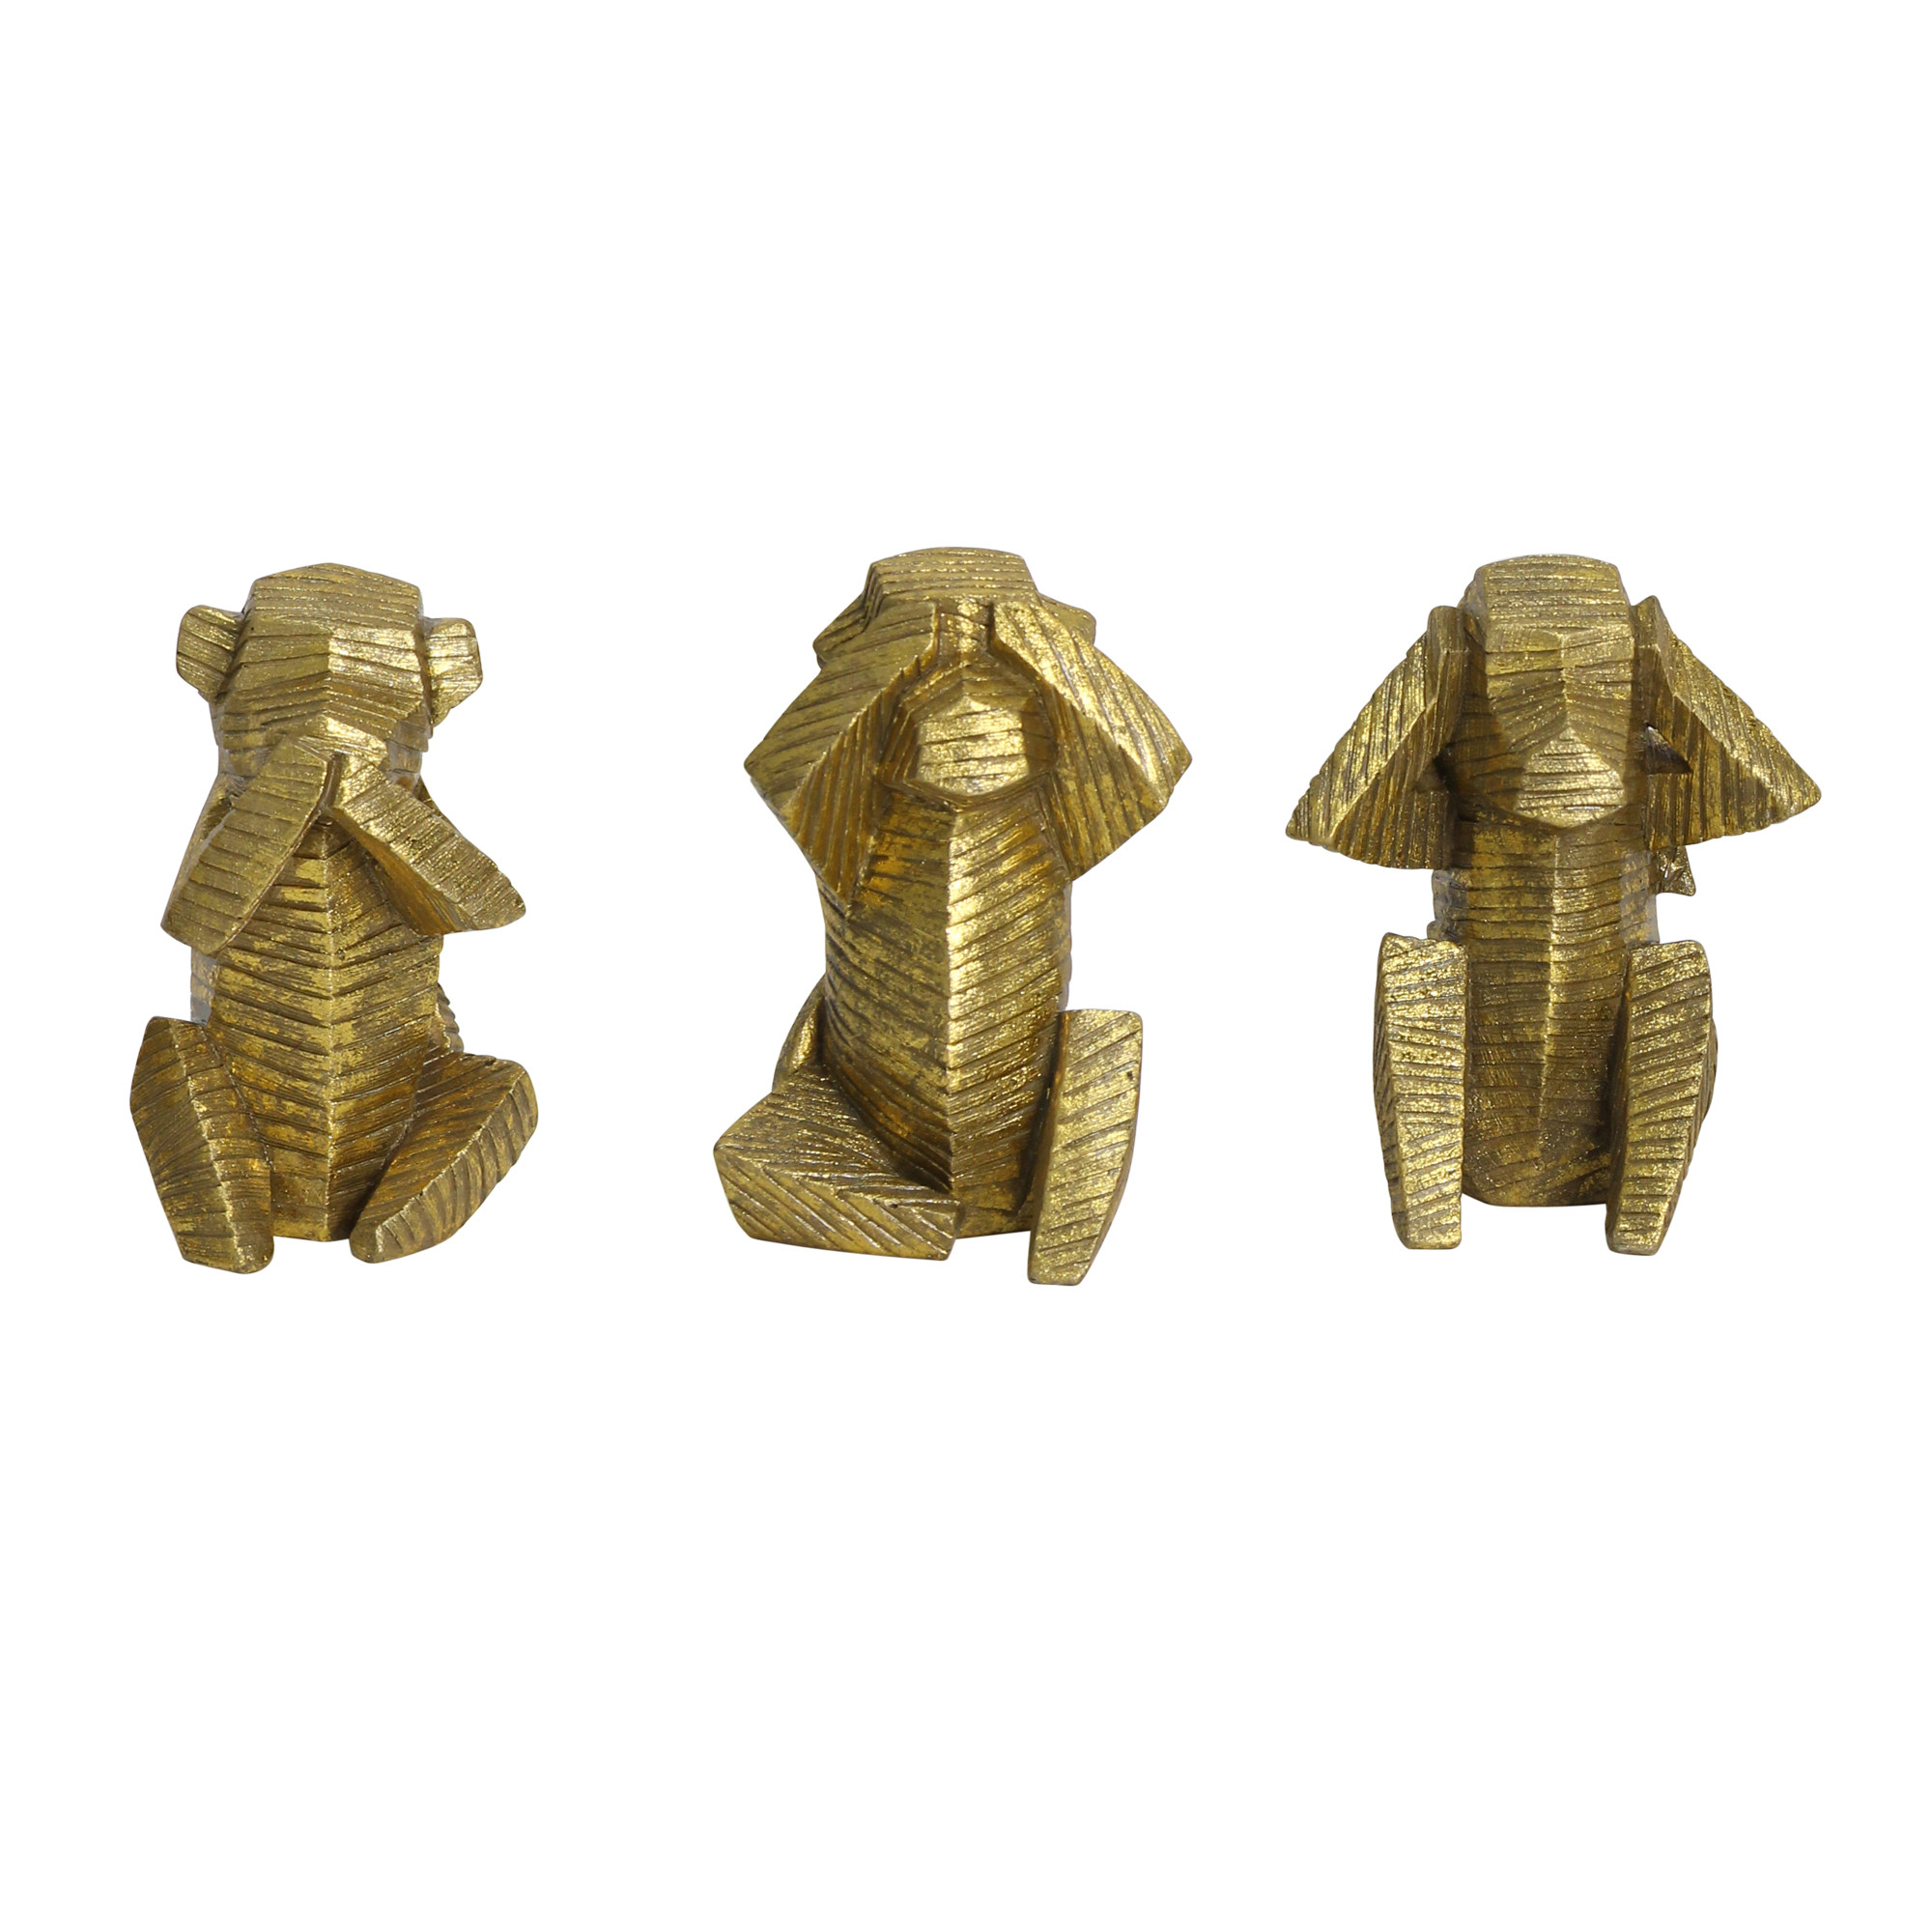 S/3 Gold Distressed Wise Monkey Sculptures